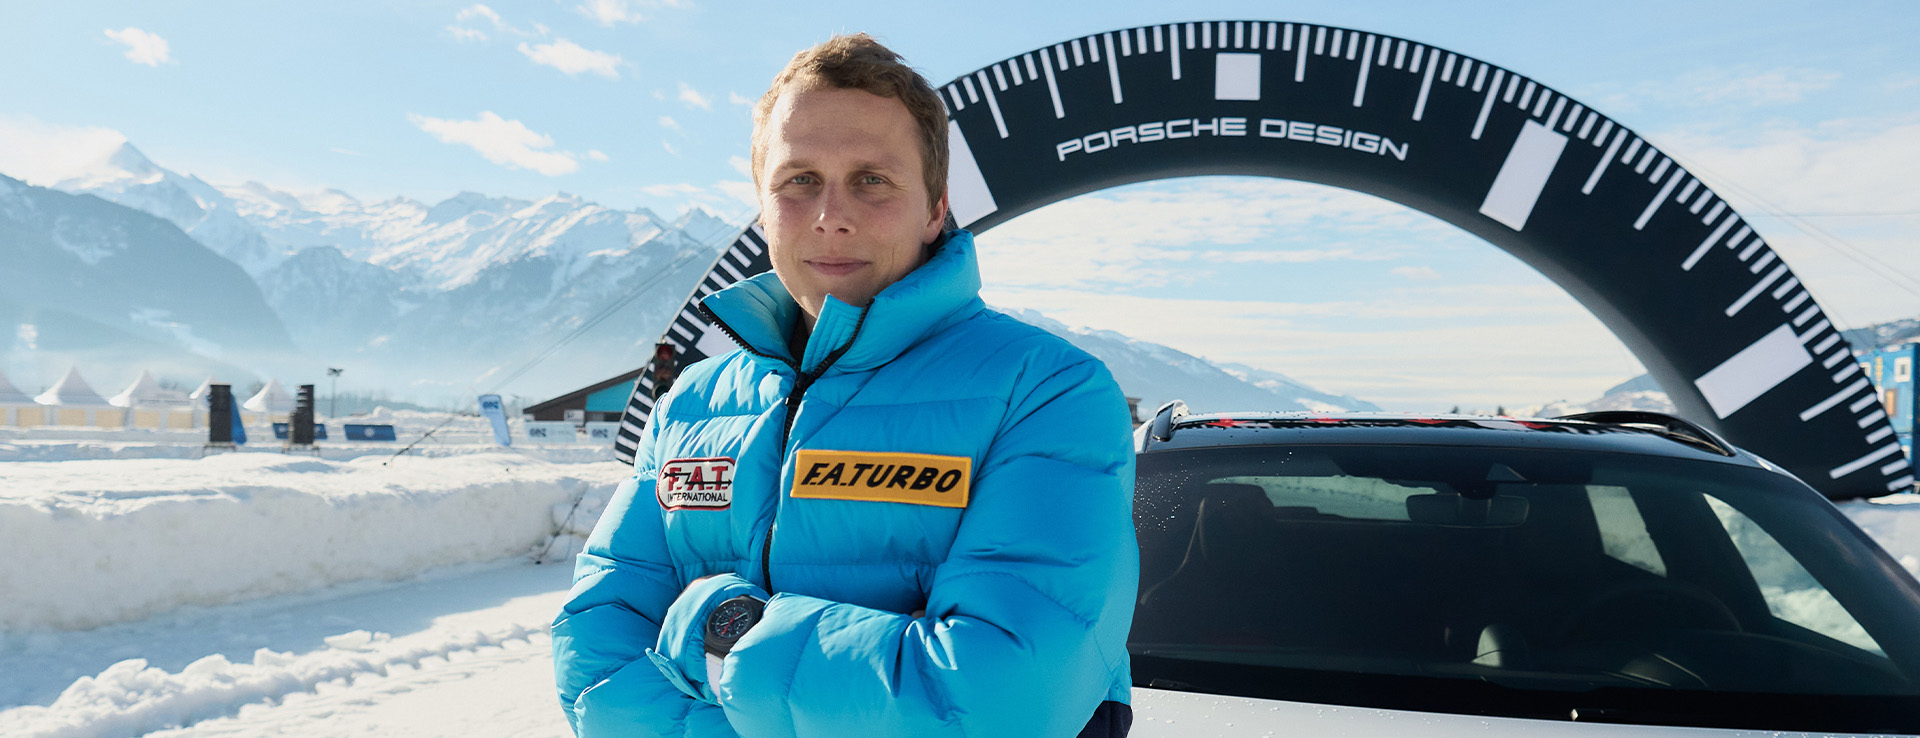 Man crossed arms leaning on Porsche in snow, mountain backdrop